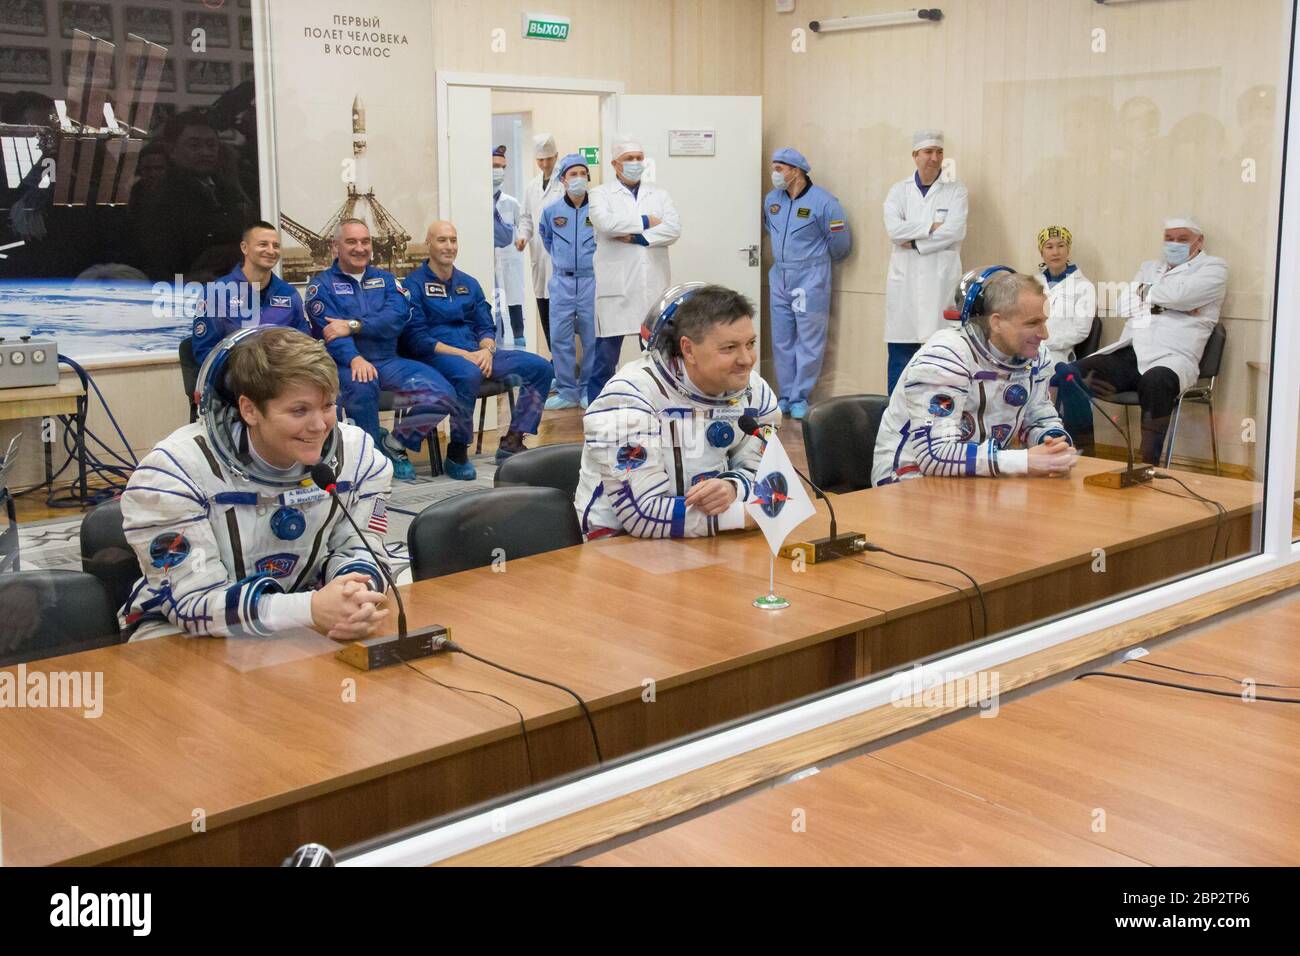 Expedition 58 Pressure Checks  Expedition 58 crew, from left to right, Flight Engineer Anne McClain of NASA, Soyuz Commander Oleg Kononenko of Roscosmos, and Flight Engineer David Saint-Jacques of the Canadian Space Agency (CSA) speak to family and friends after having their Russian Sokol suits pressure checked in preparation for their launch aboard the Soyuz MS-11 spacecraft on Monday, Dec. 3, 2018, at the Baikonur Cosmodrome in Kazakhstan. Launch of the Soyuz rocket is scheduled for the same day and will carry Kononenko, Saint-Jacques, and McClain into orbit to begin their six and a half mon Stock Photo